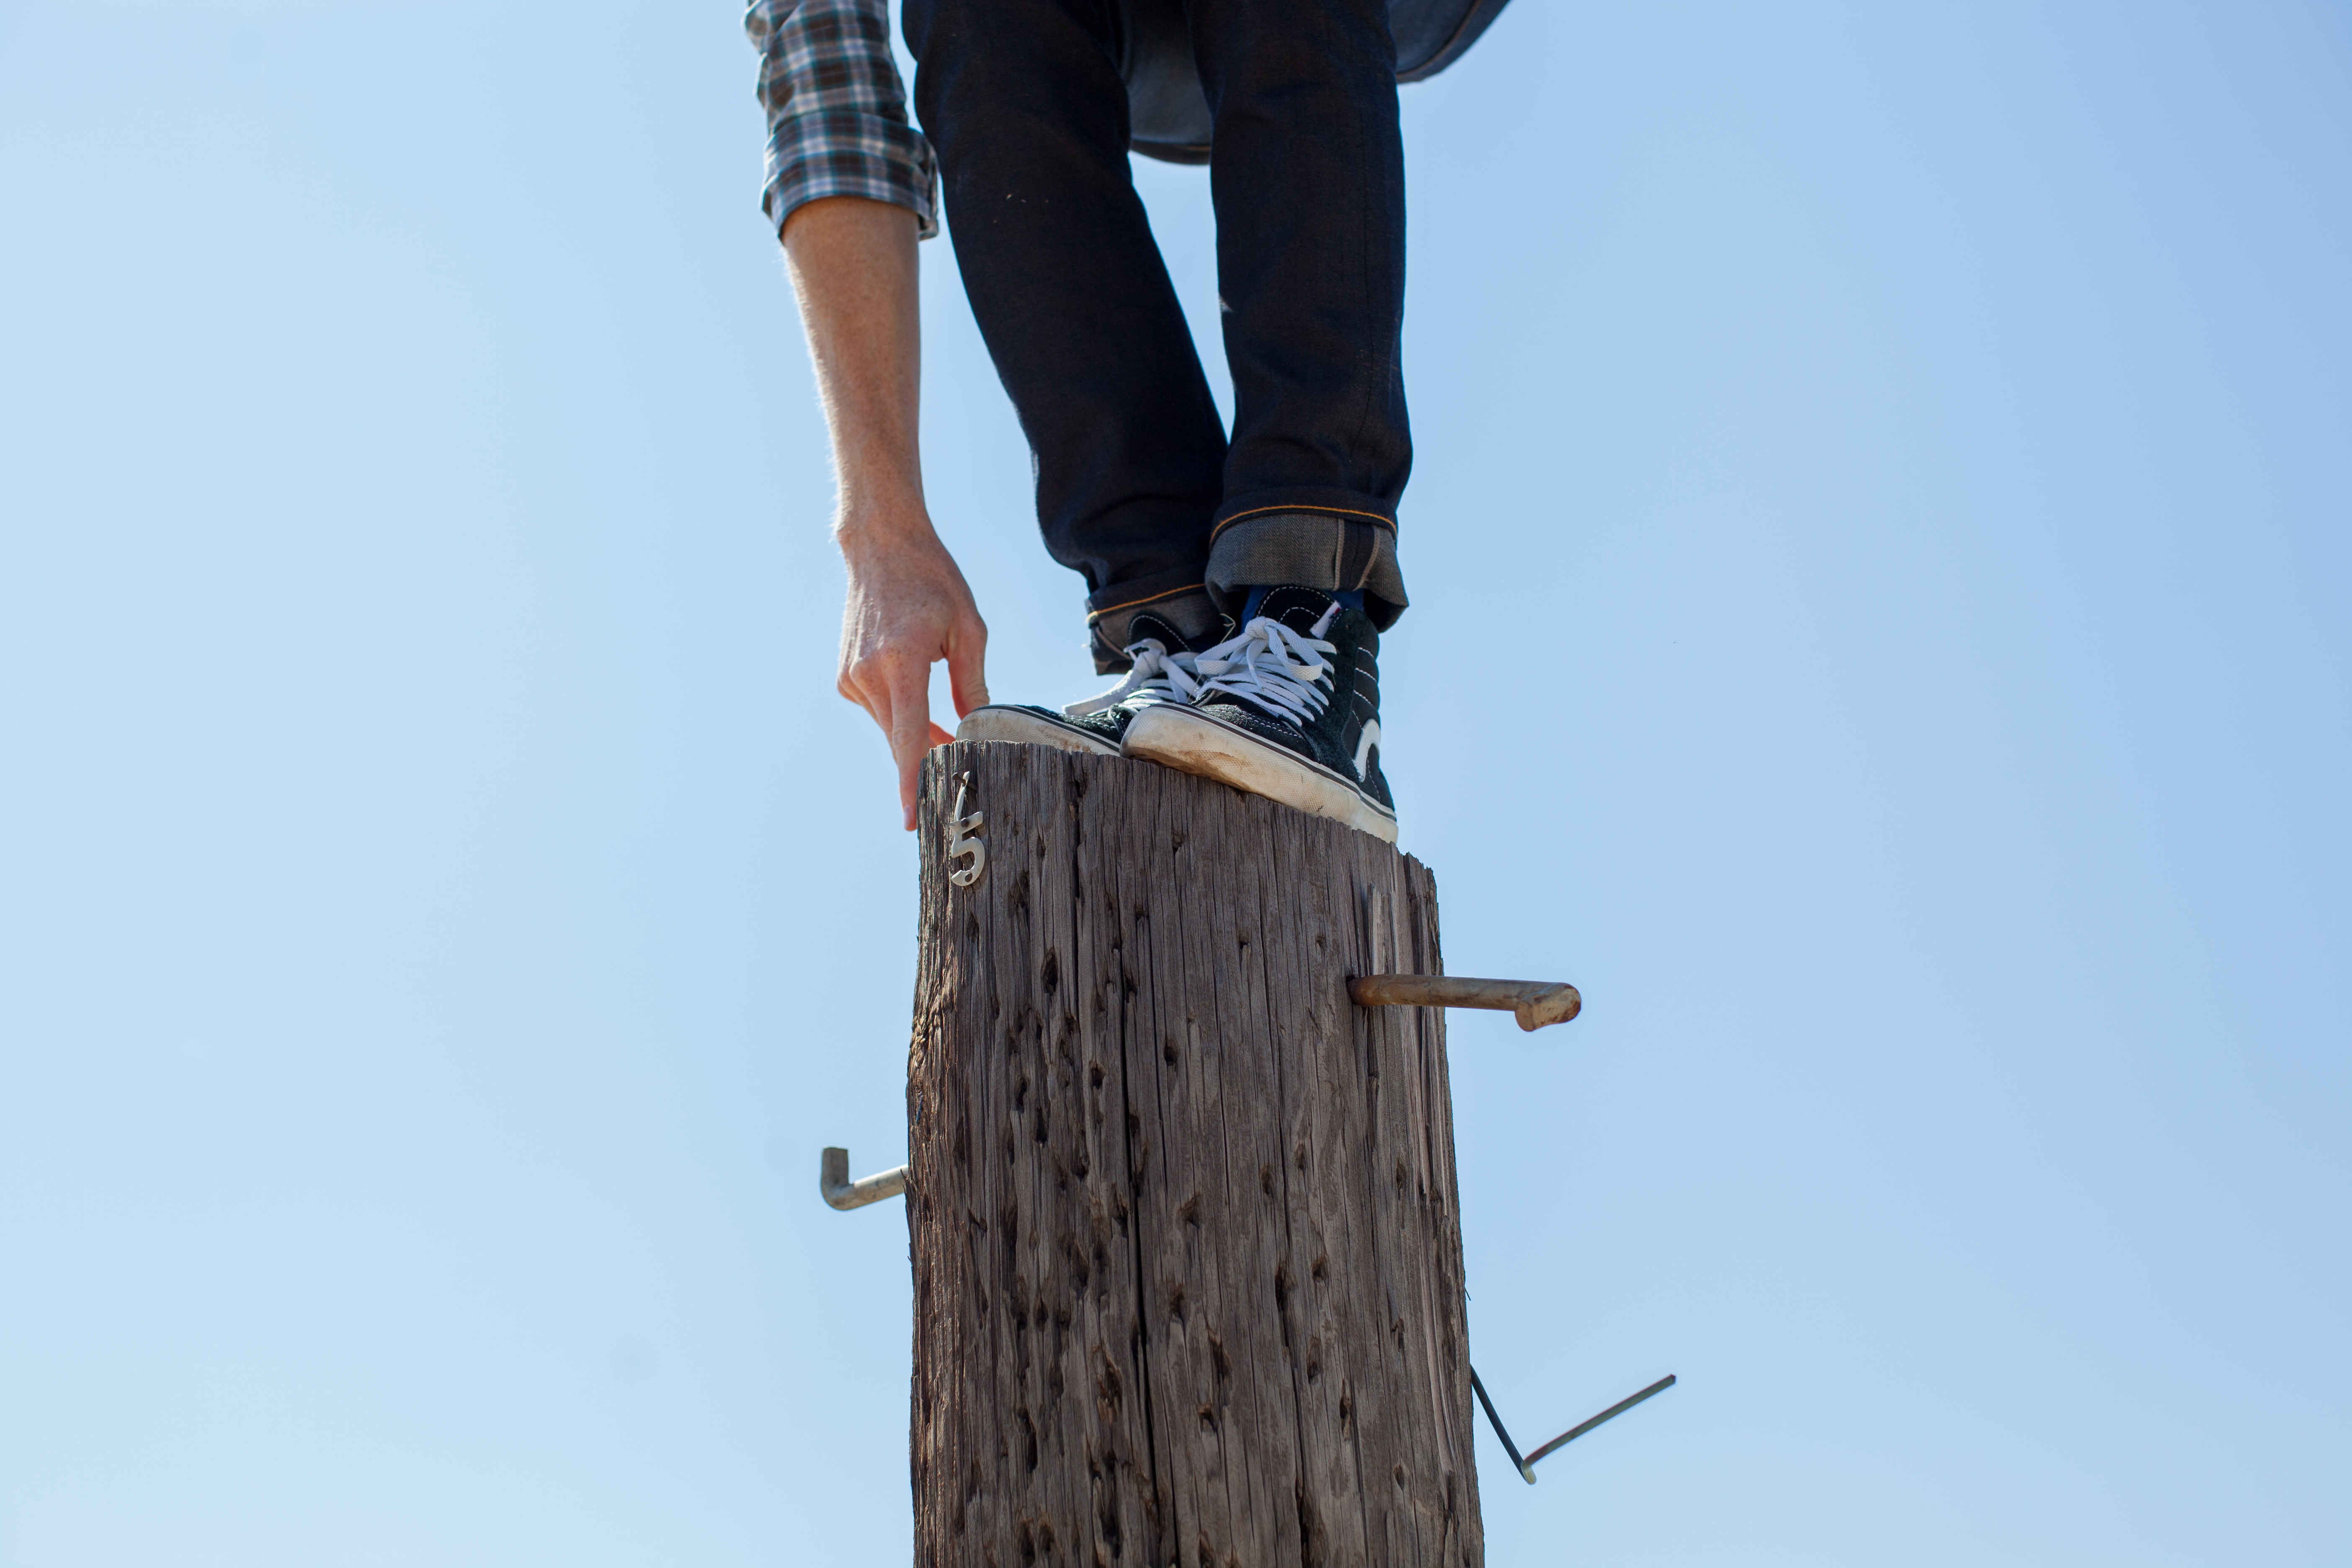 man wearing black jeans and black and white shirt standing on a tree trunk